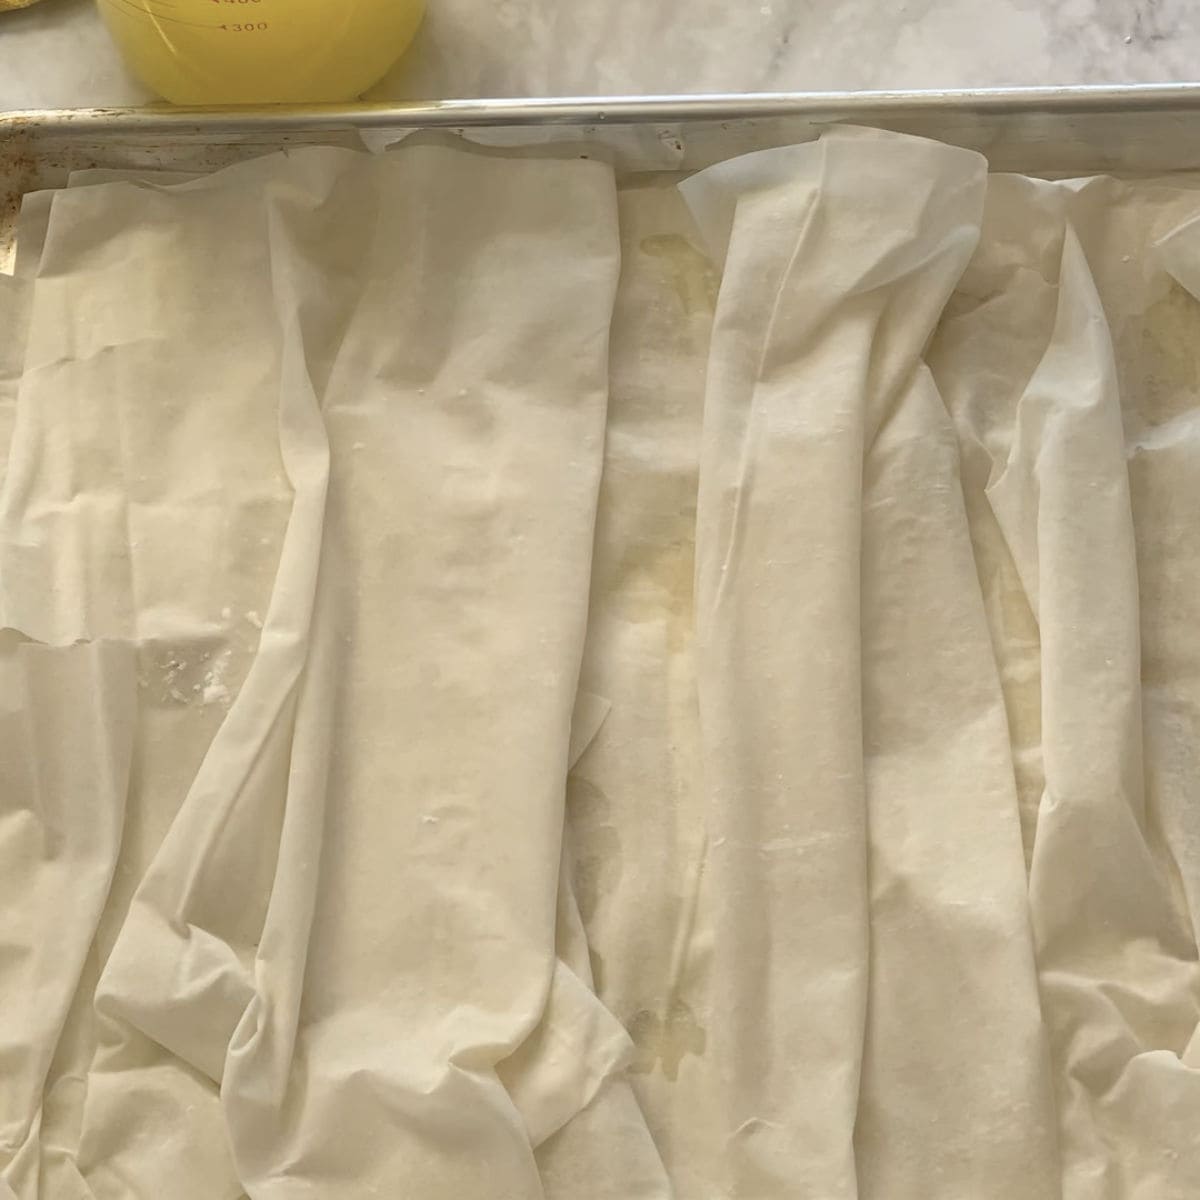 Pleating the phyllo sheets.